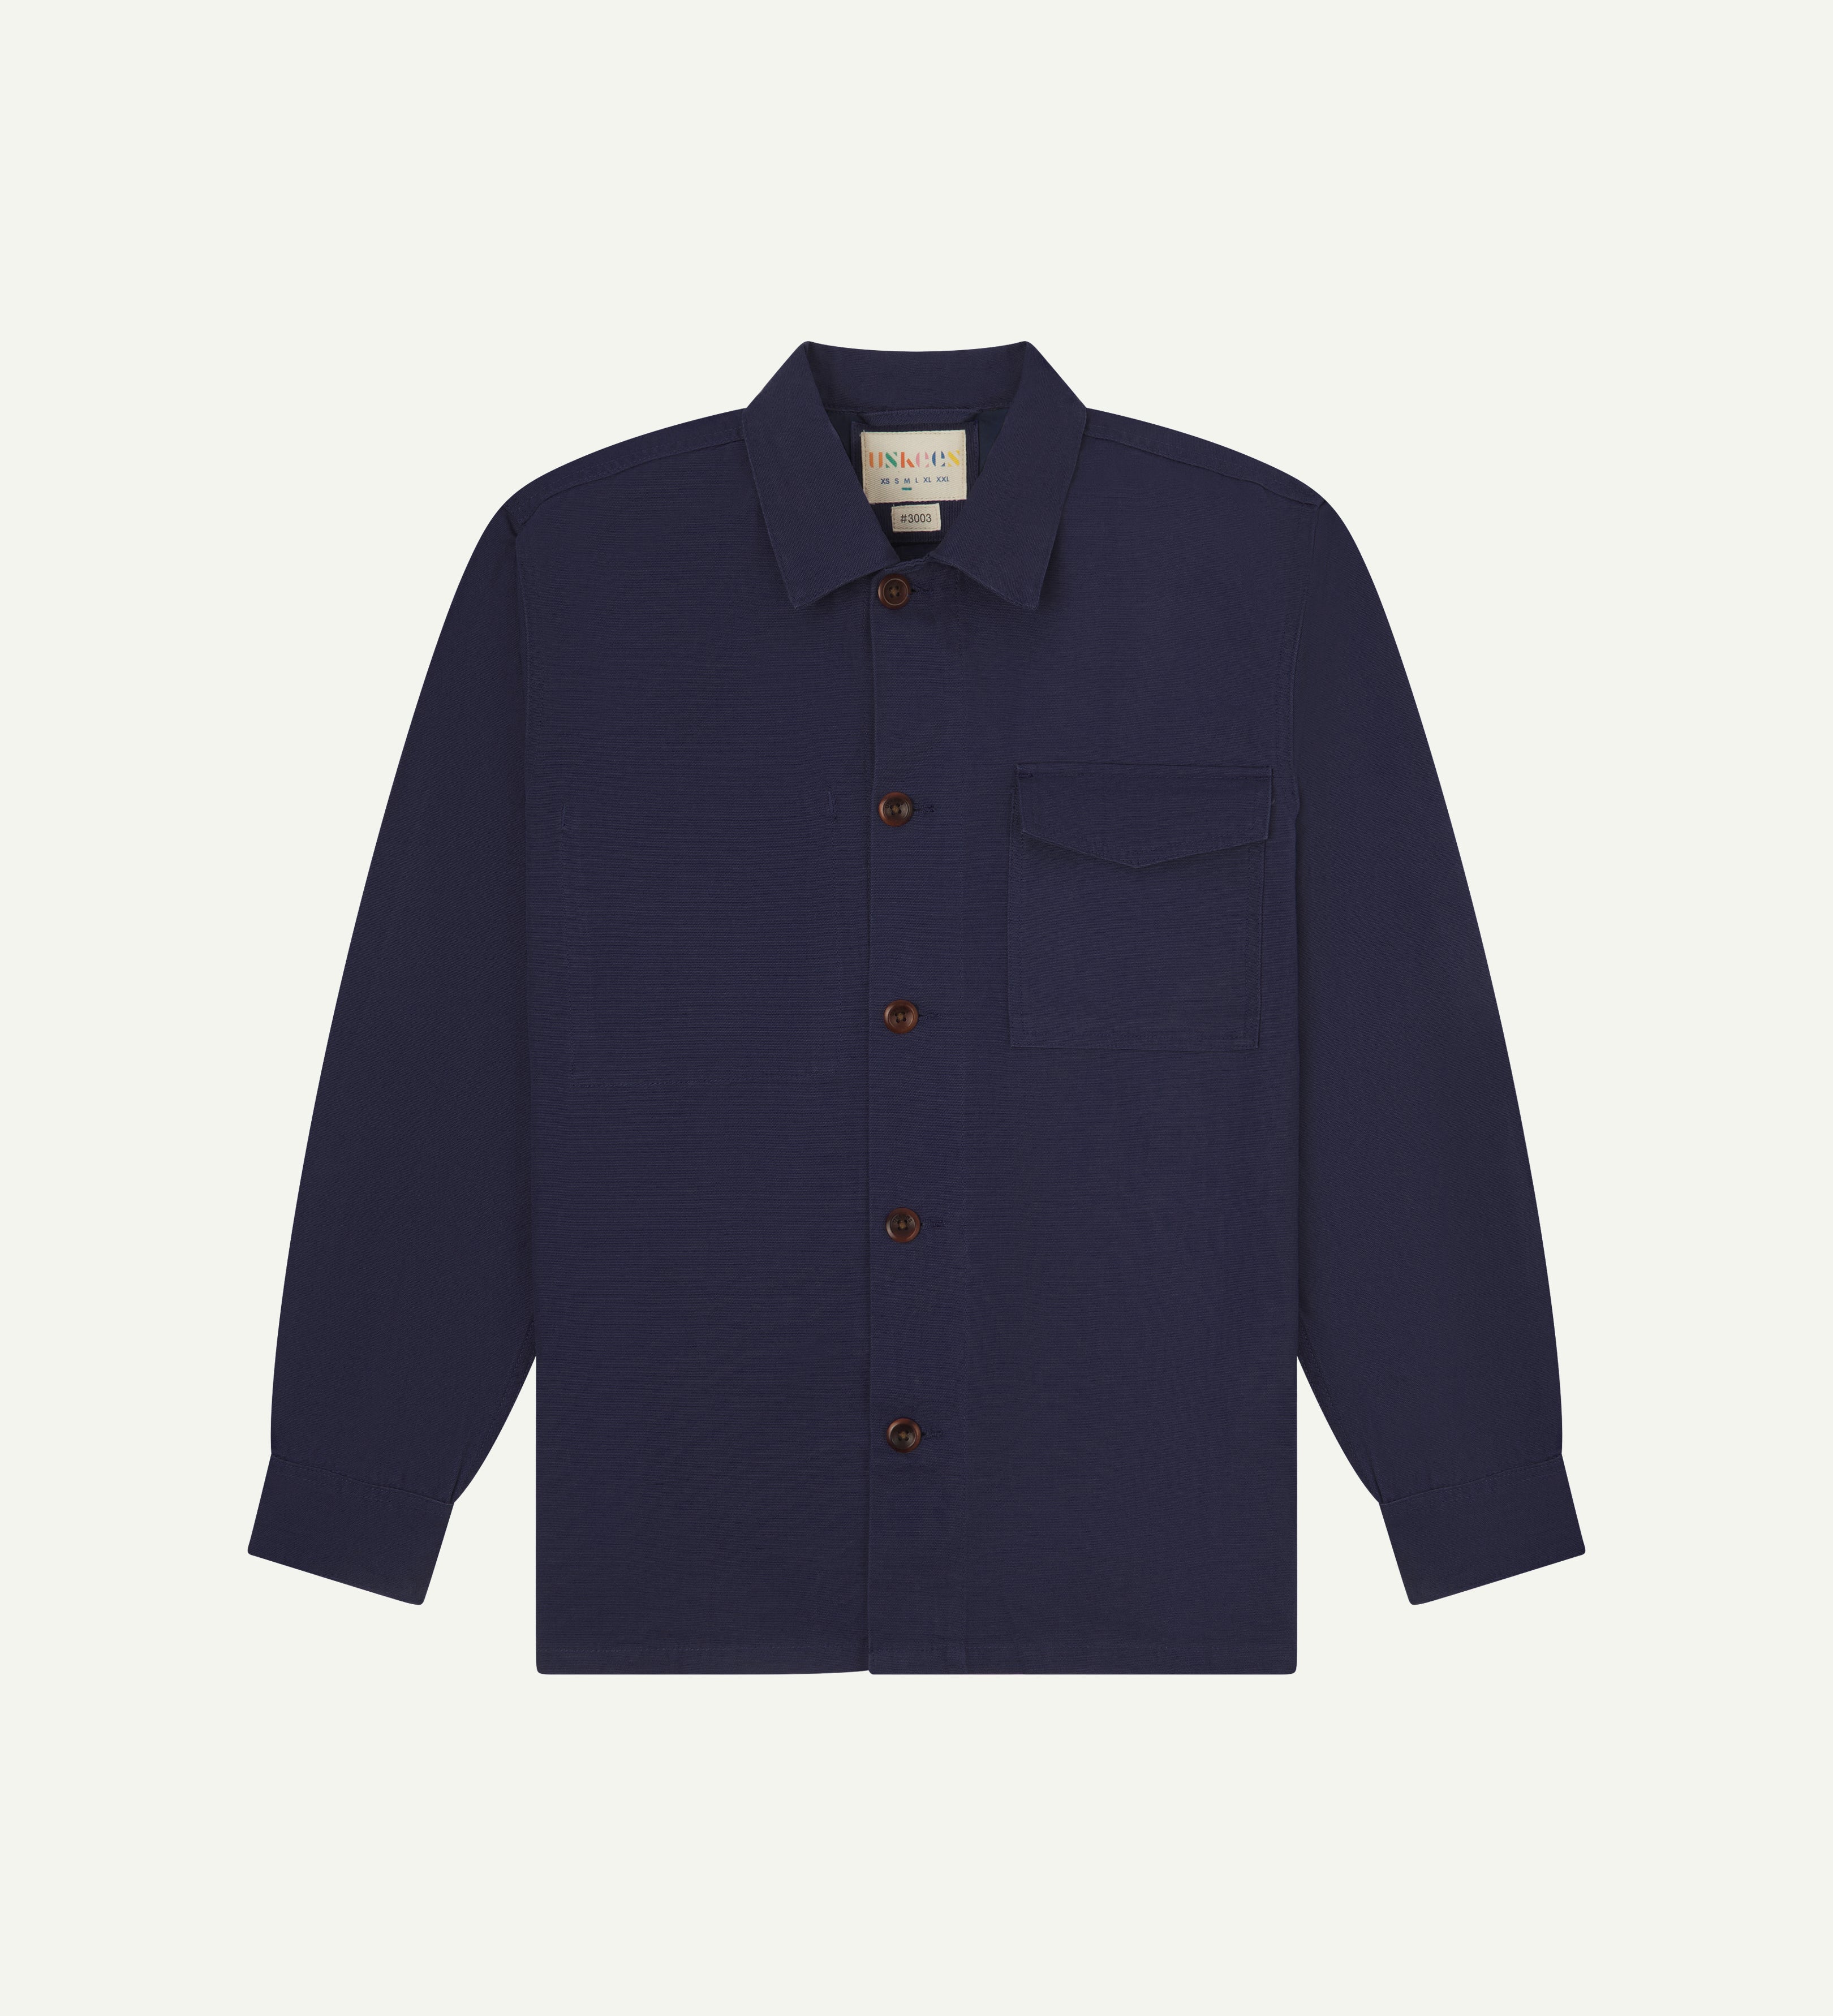 Front flat shot of dark blue #3003 workshirt from Uskees. Showing chest pocket with flap and corozo buttons.